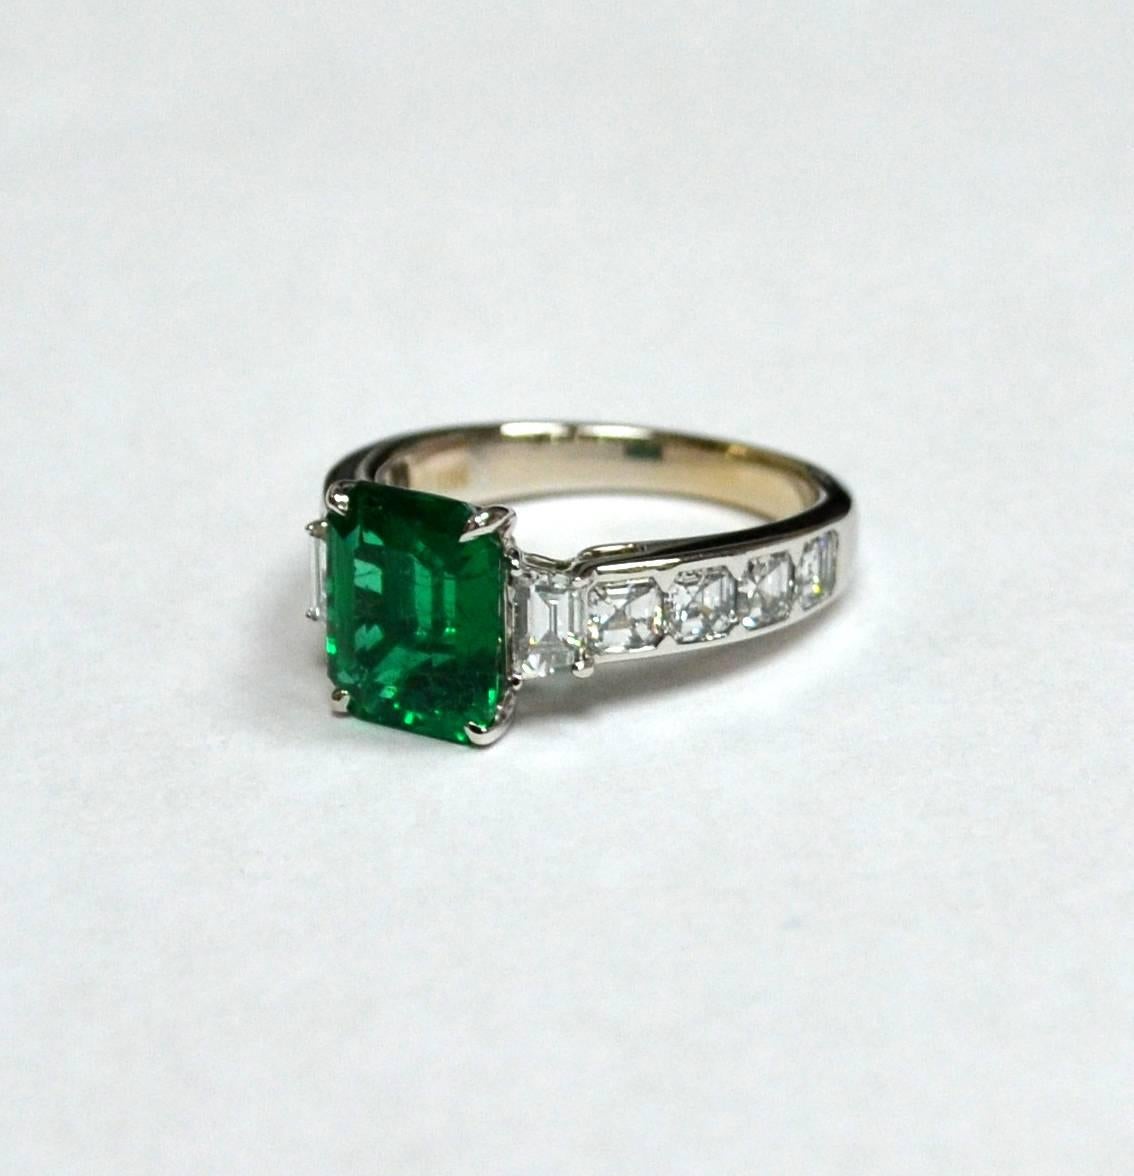 Emerald Cut Zambian Emerald Diamond 18 Karat Gold Engagement Ring In New Condition For Sale In New York, NY